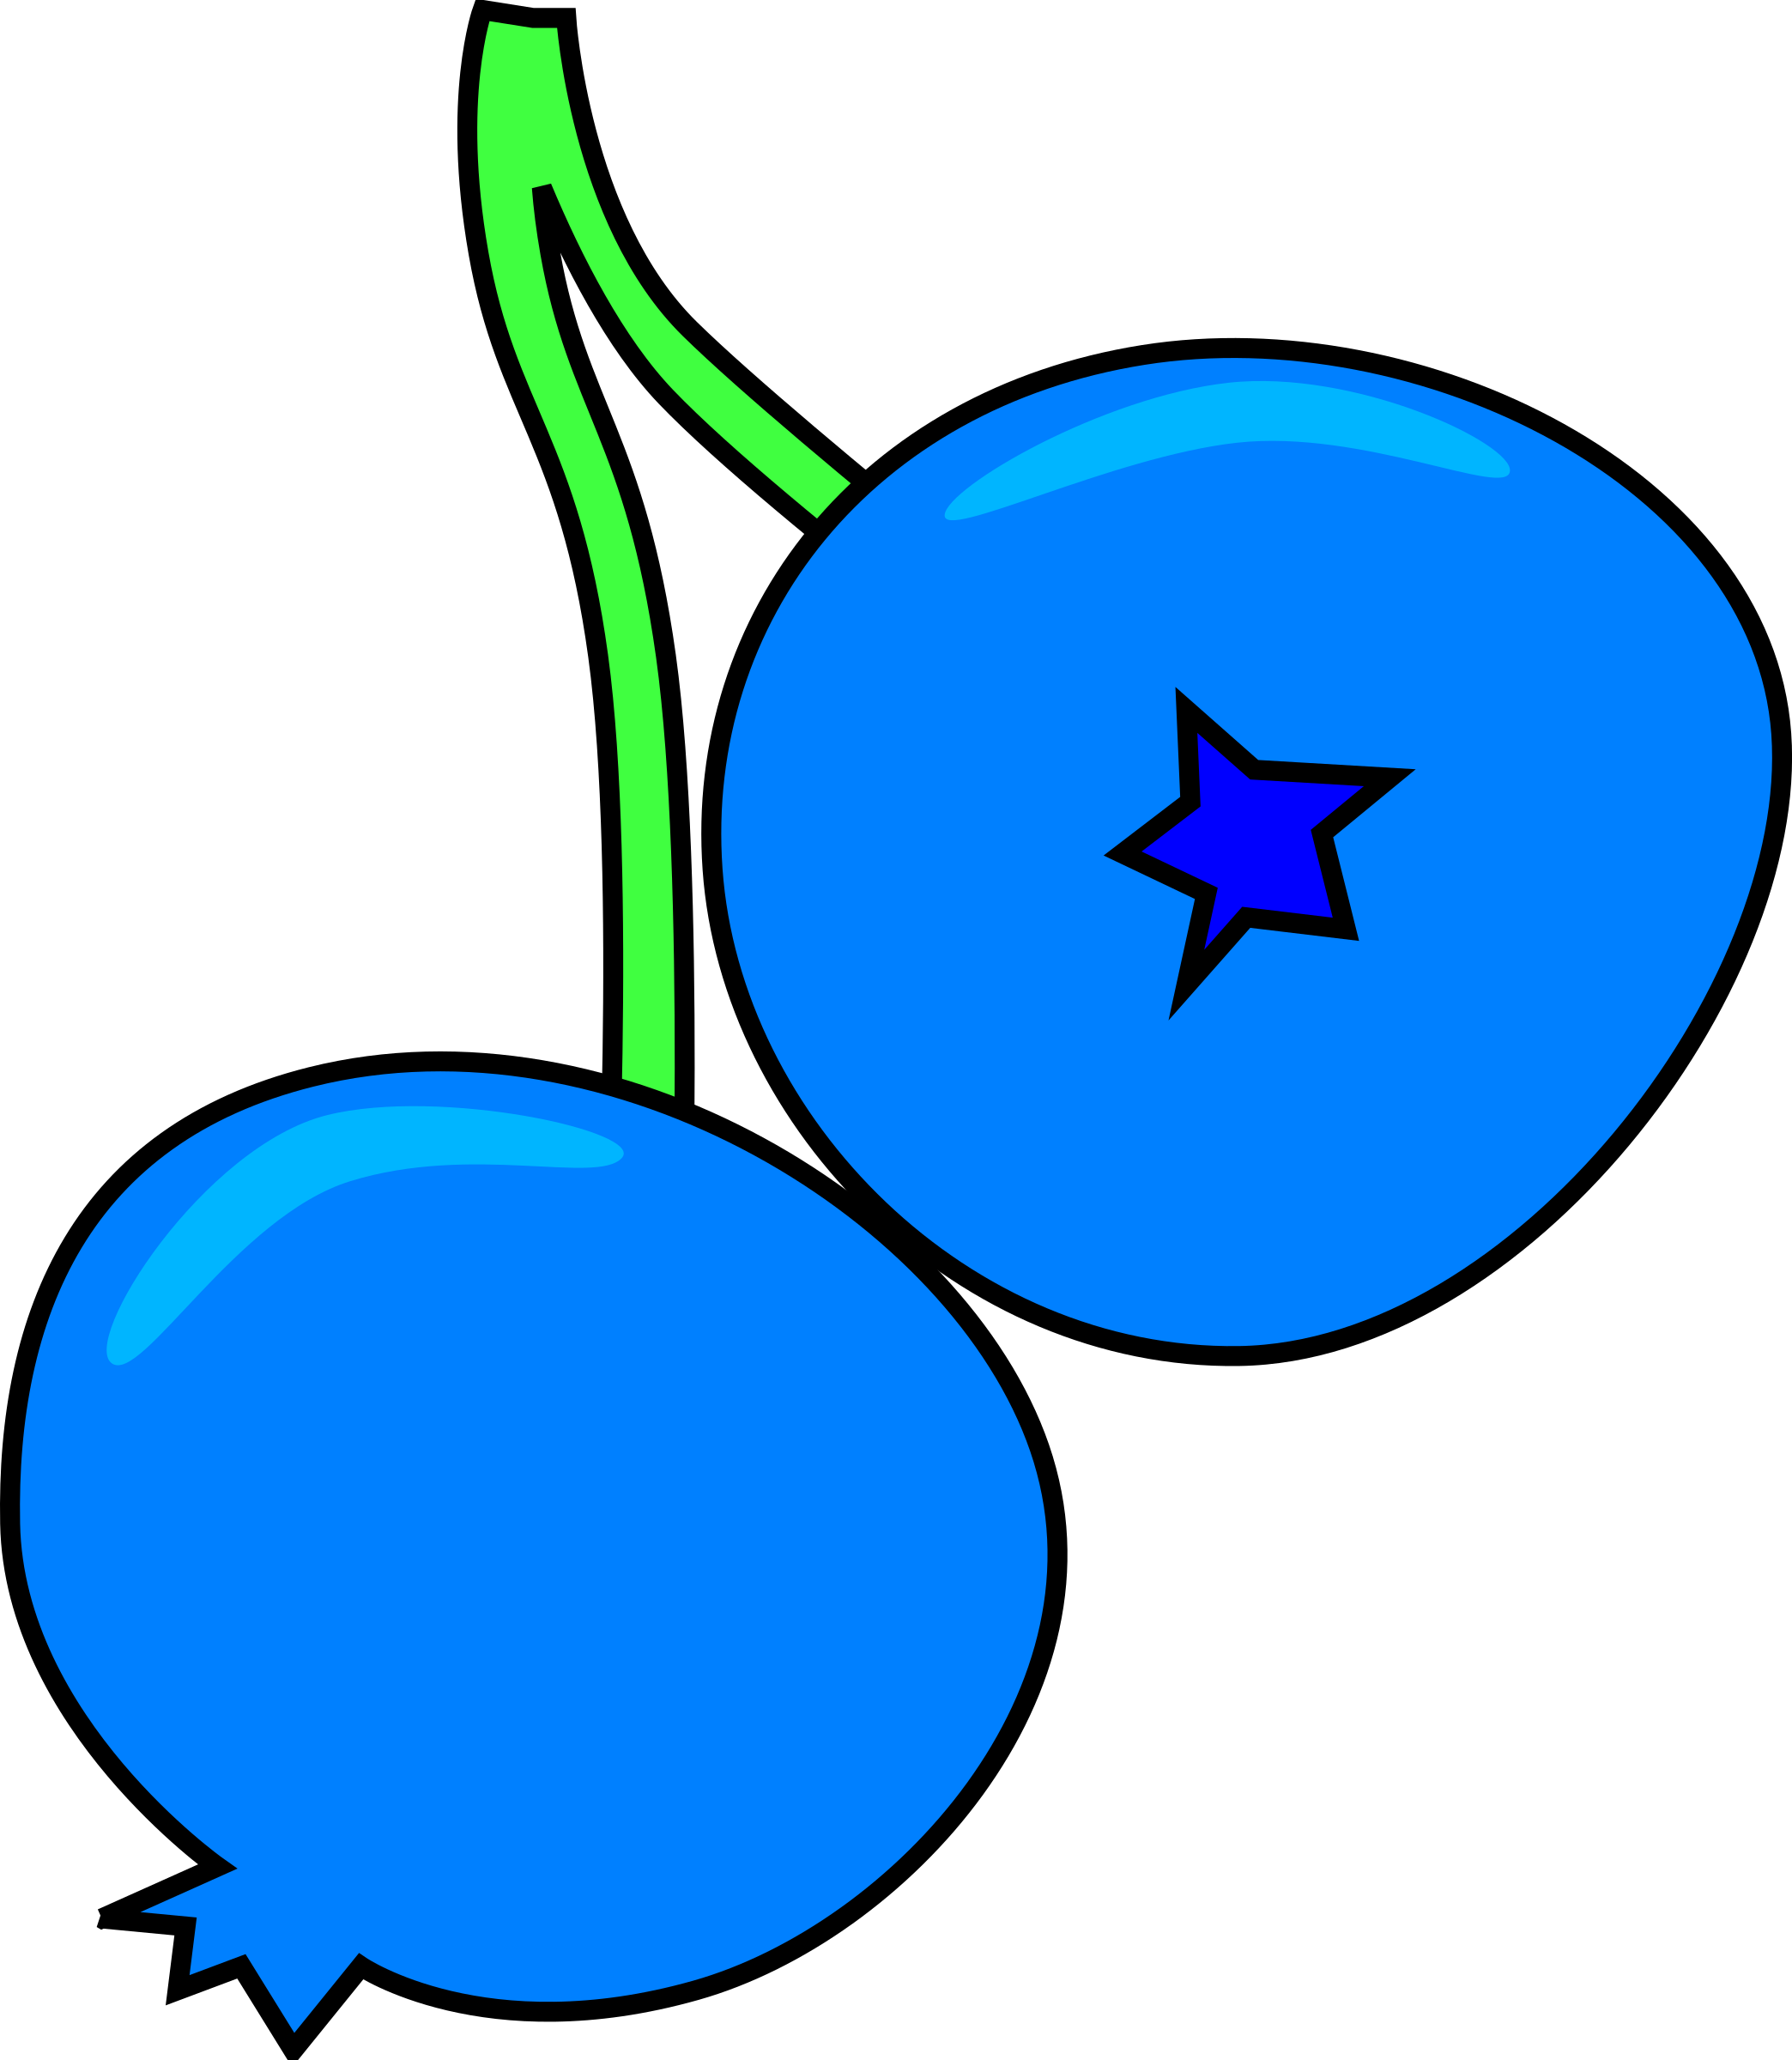 Blueberries clipart blue berry. Blueberry big image png